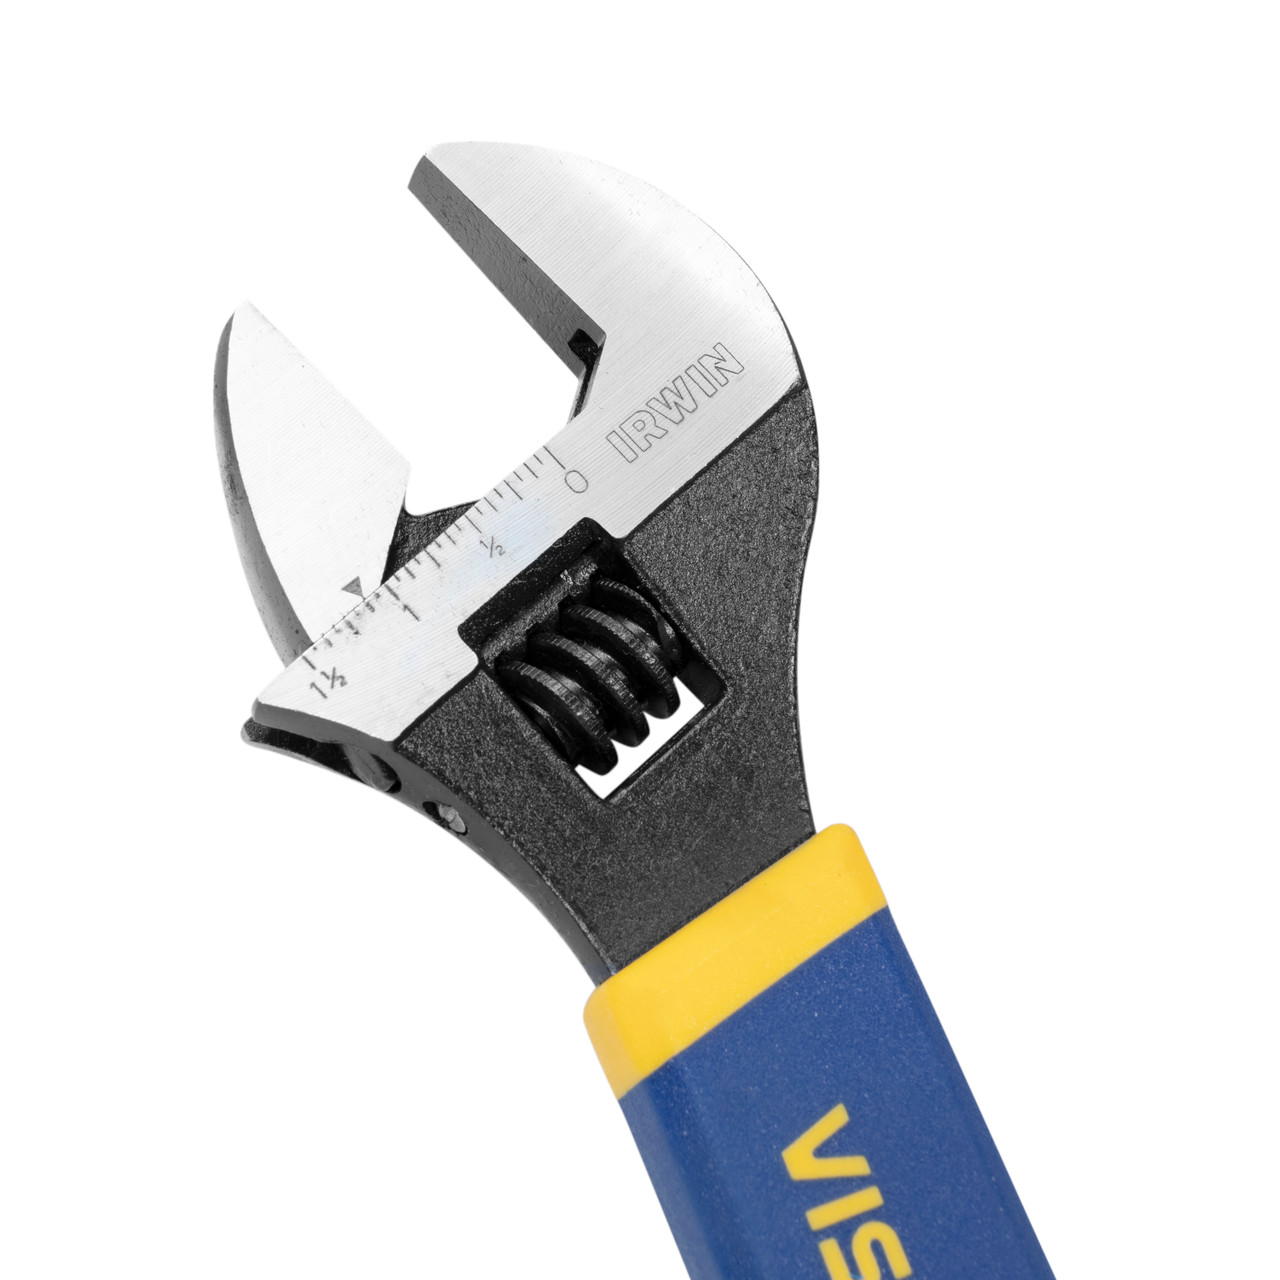 IRWIN VISE GRIP 2078706 4PC ADJUSTABLE WRENCH TRAY SET, 4 PIECE